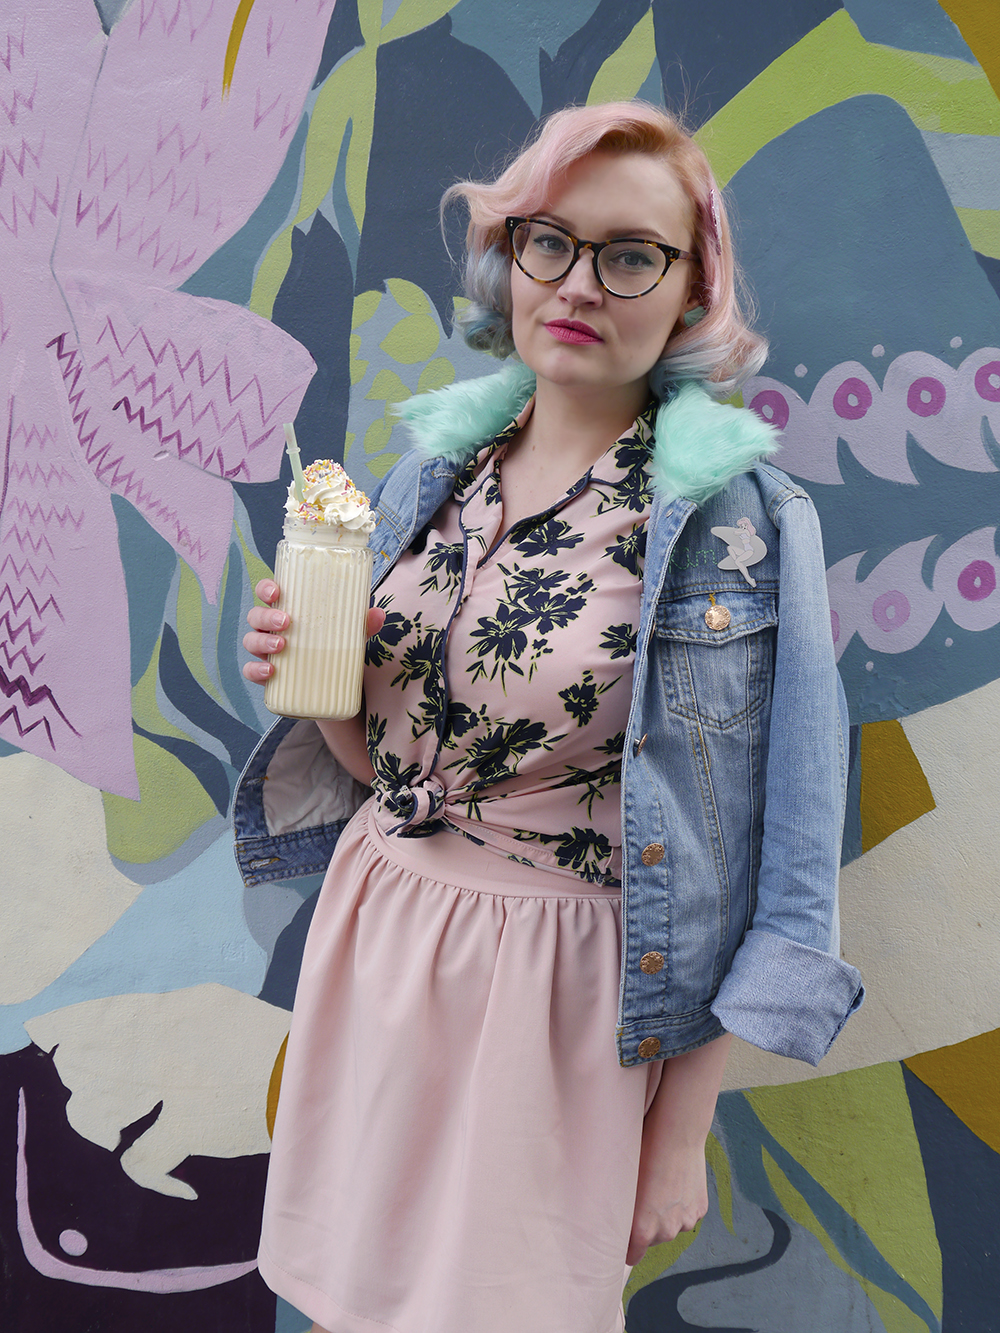 Scottish fashion blogger Kimberley from Wardrobe Converations with candy coloured hair and DIY retro denim jacket standing against grafitti background with milkshake